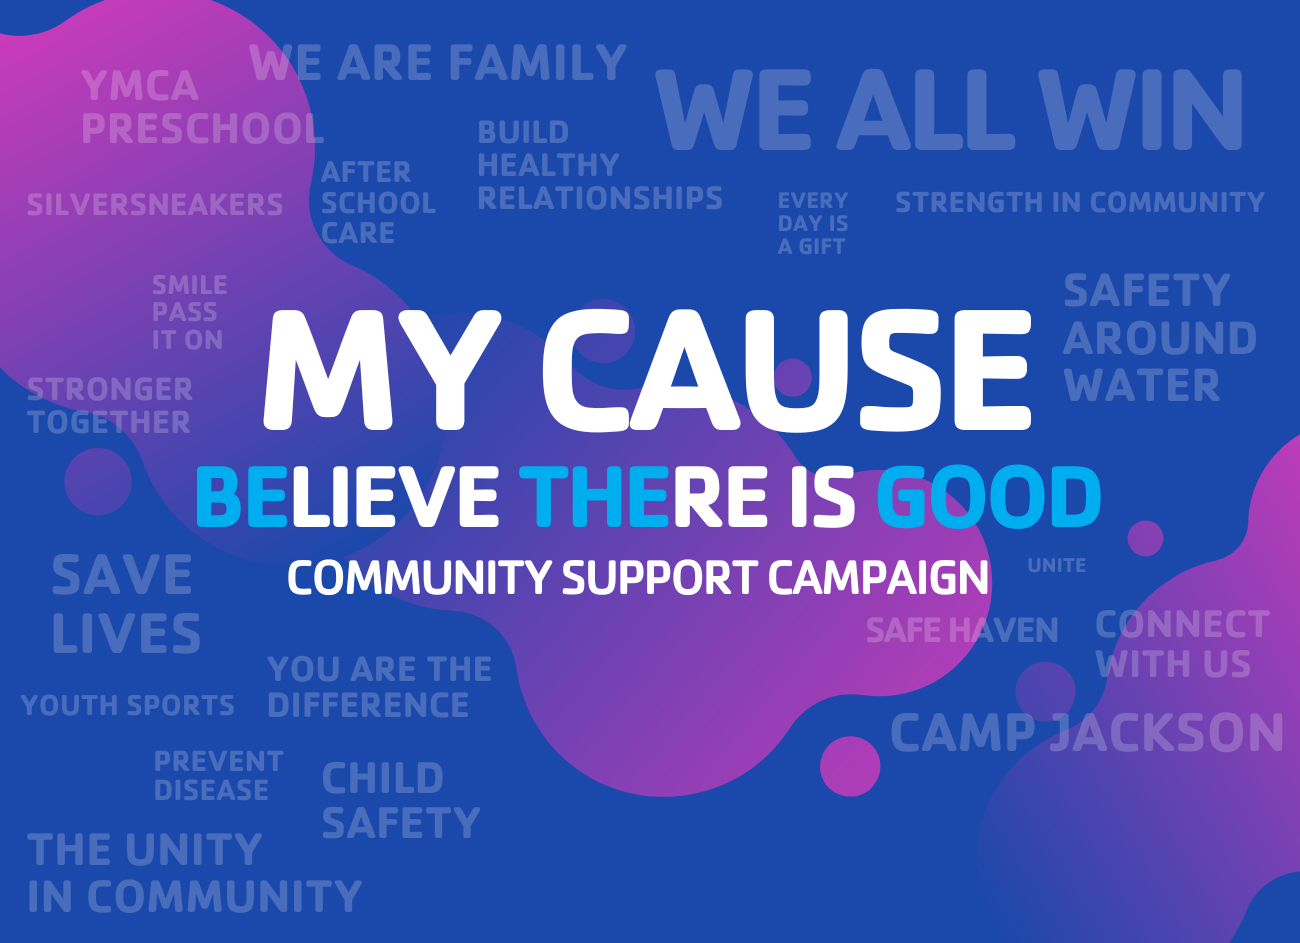 My Cause Homepage Banner (1300 × 943 px)